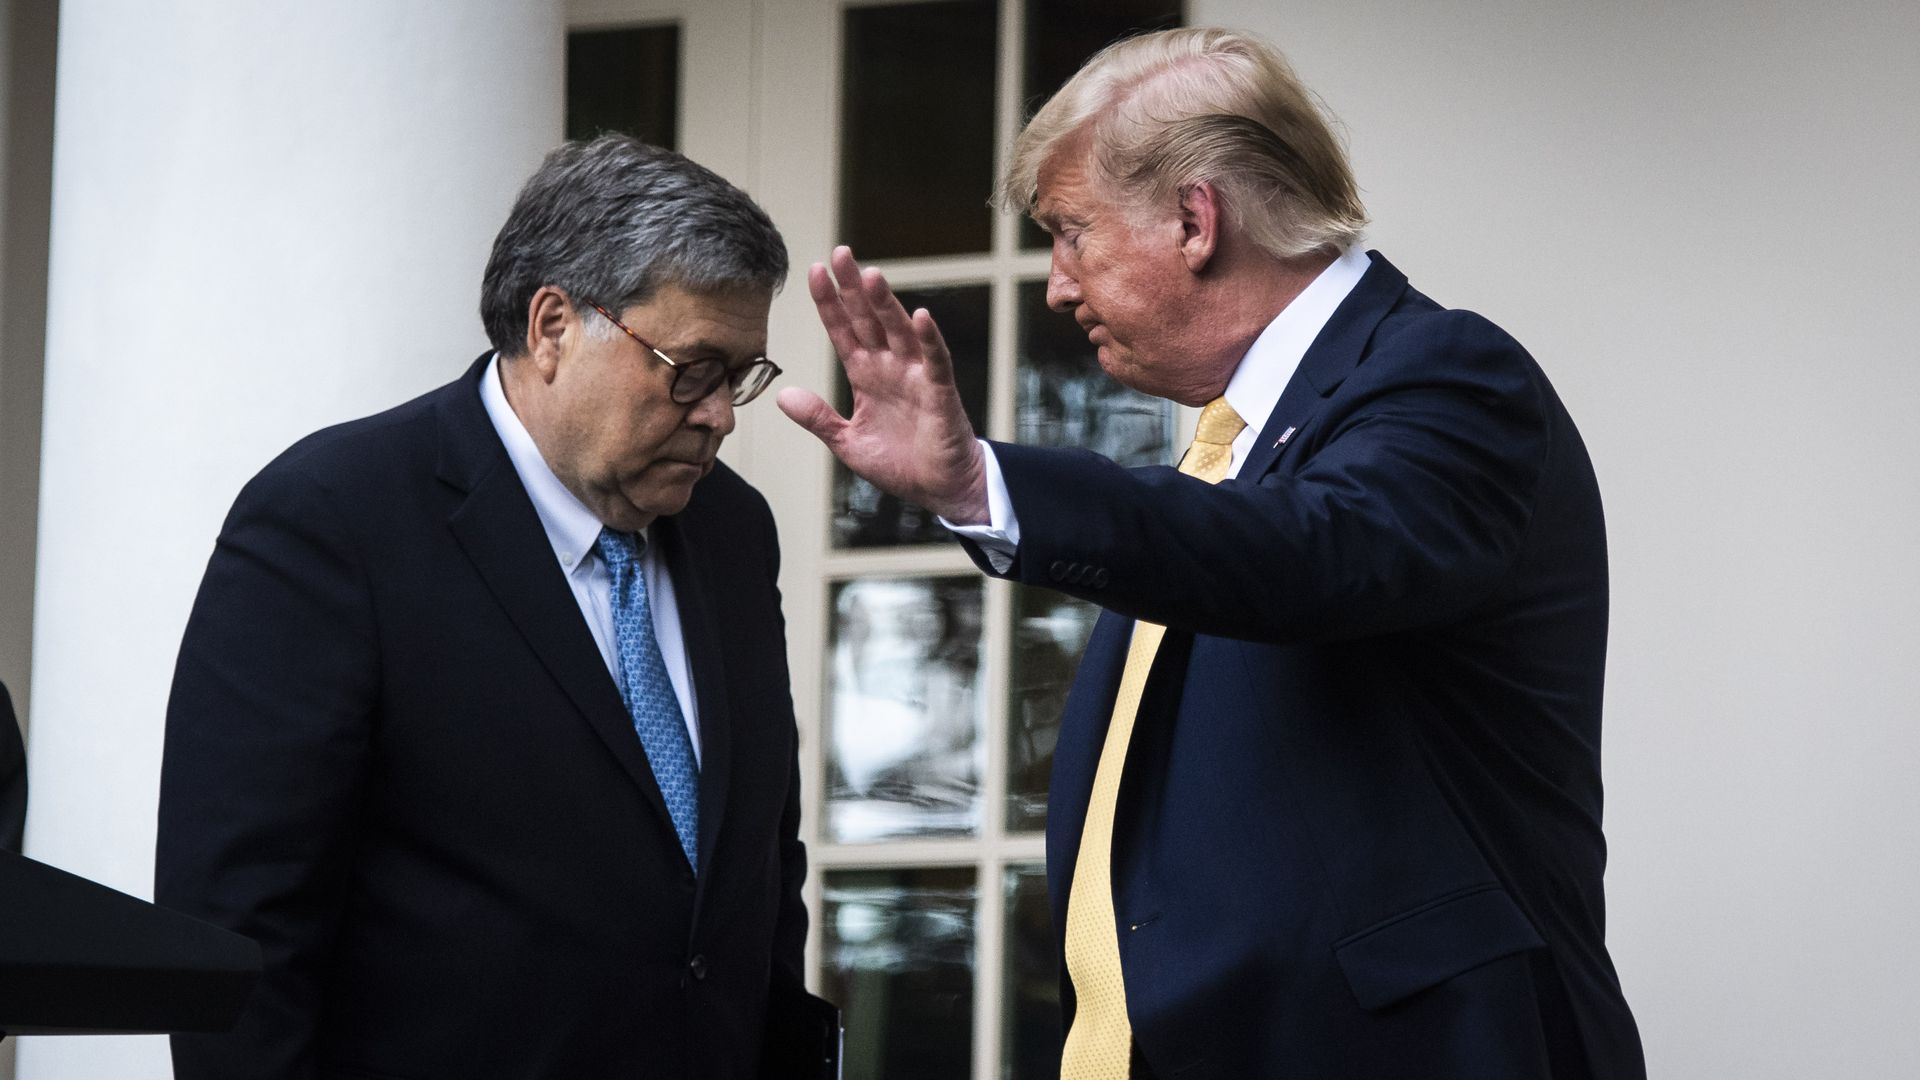 In this image, Trump and Barr stand in front of each other wearing suits in the Rose Garden.